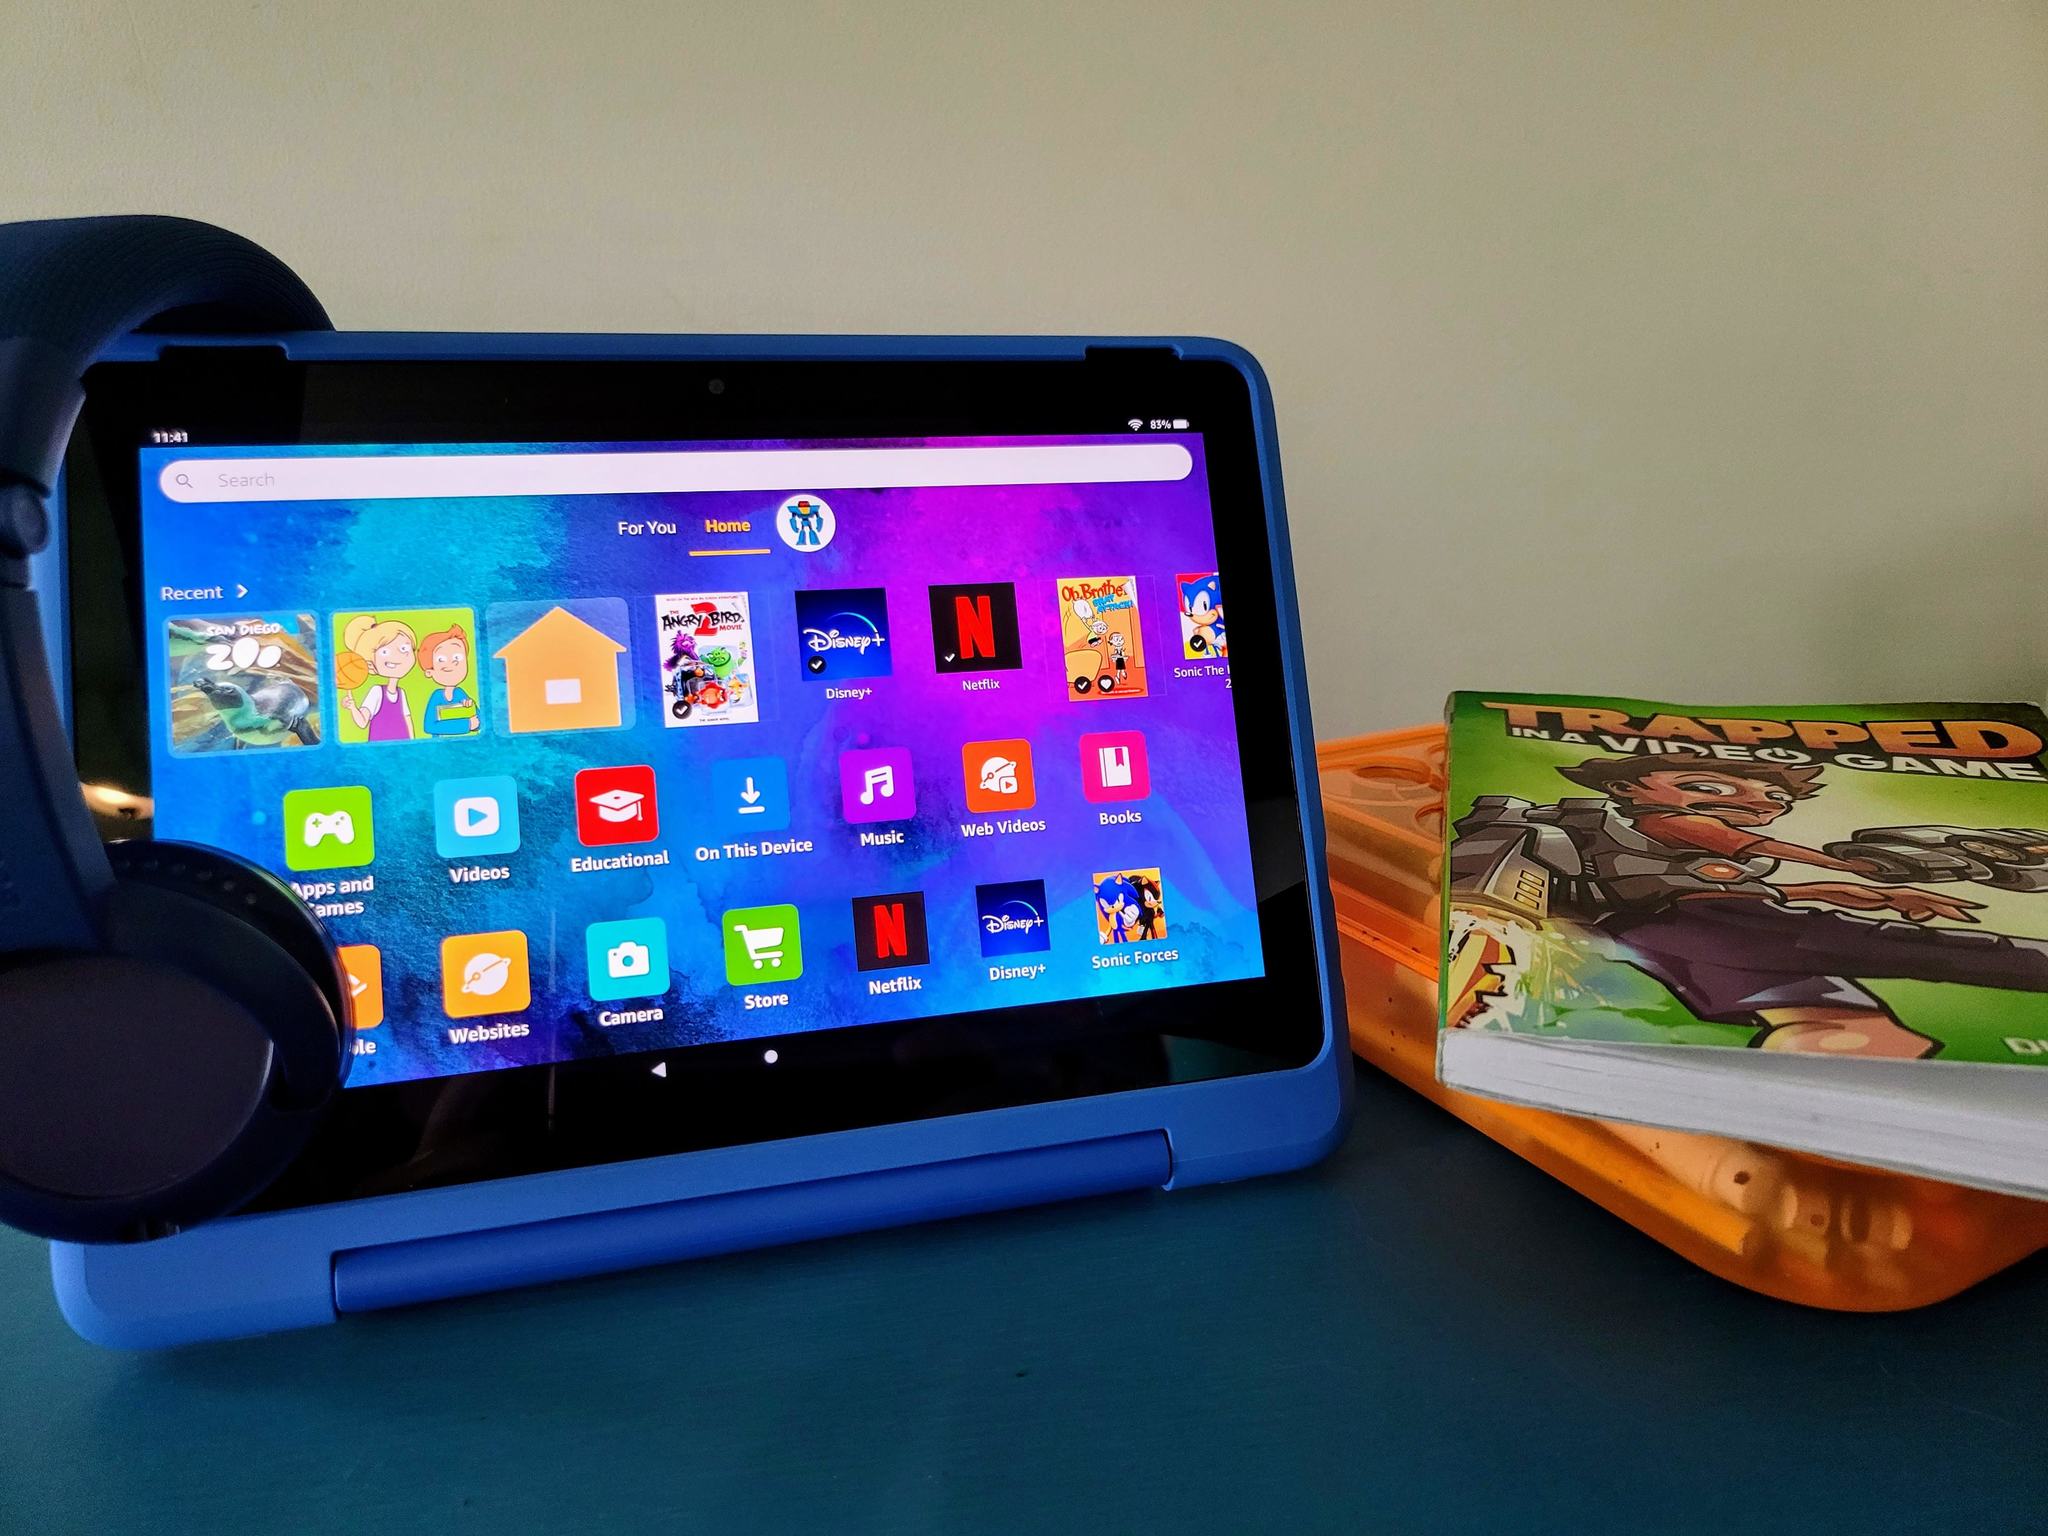 Review: The Amazon Fire HD 10 Kids Pro strikes the right balance